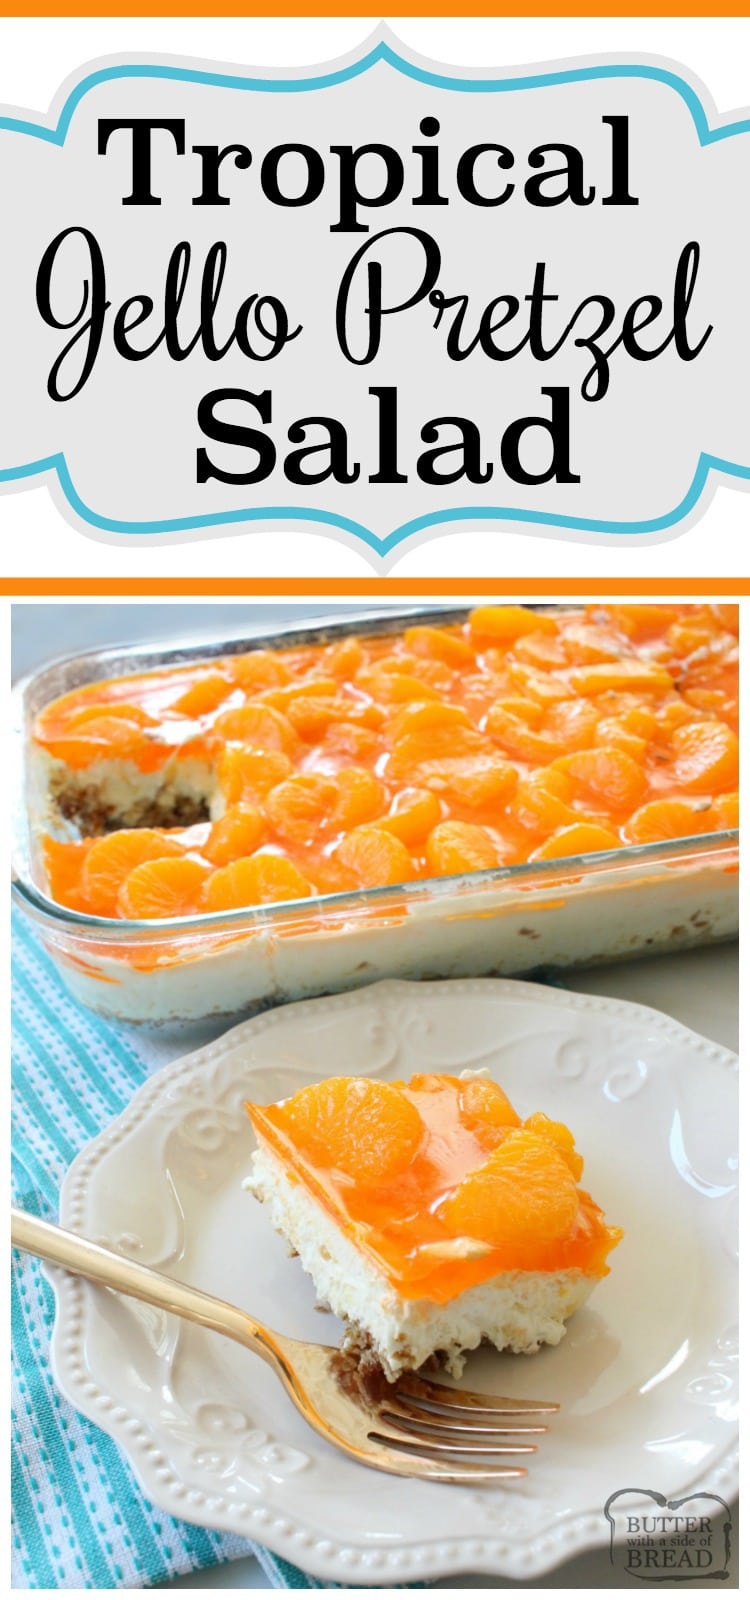 A traditional Jello Pretzel Salad with a fun twist- tropical flavors! The orange, pineapple and coconut combine to make this an insanely delicious salad. Easy to make sweet salad recipe from Butter With A Side of Bread